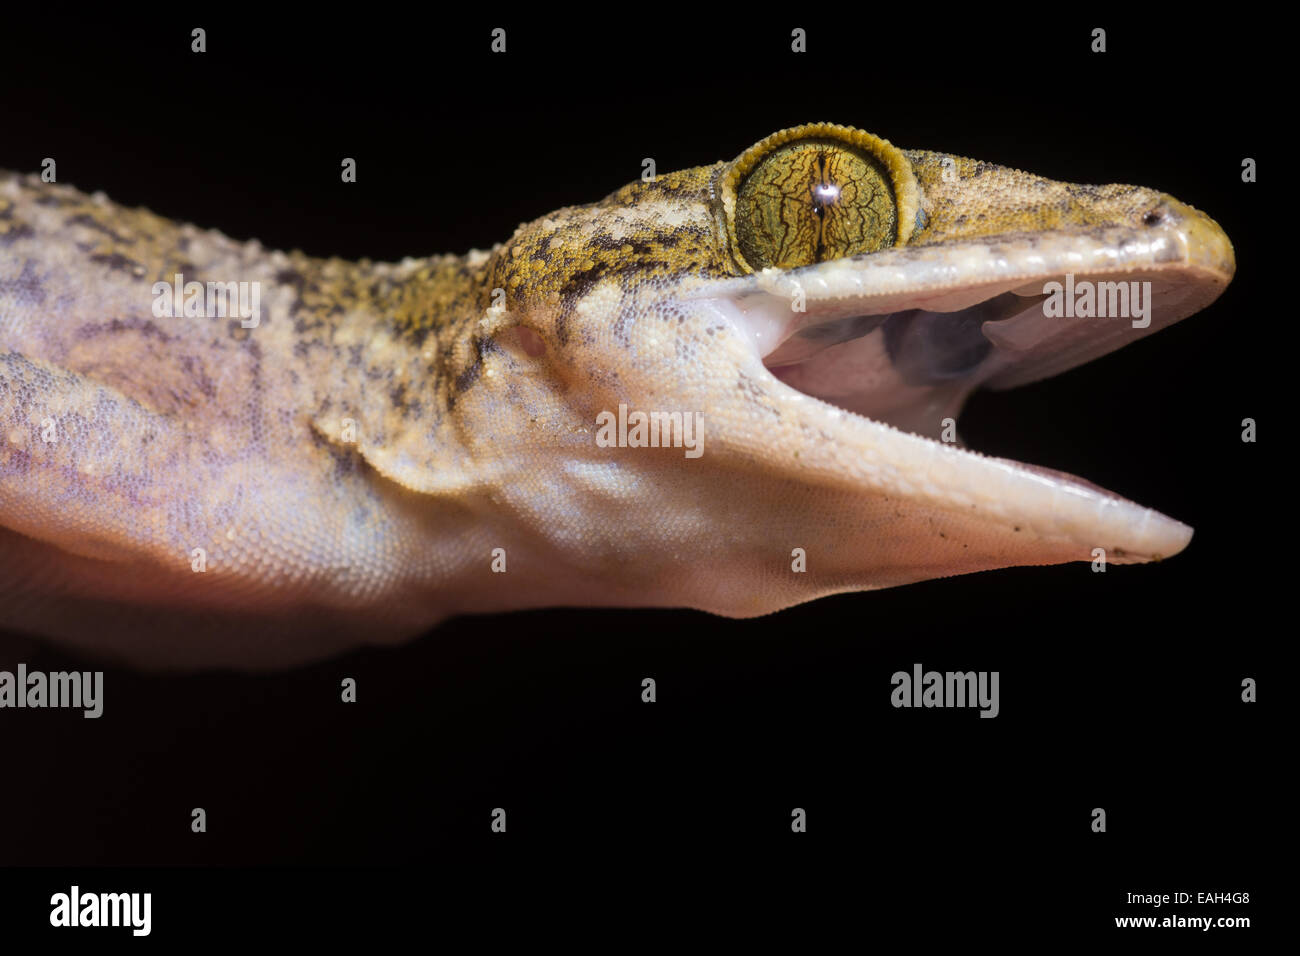 A Yoshi's bow-fingered gecko (Cyrtodactylus yoshii) tries to look as intimidating as possible. Stock Photo